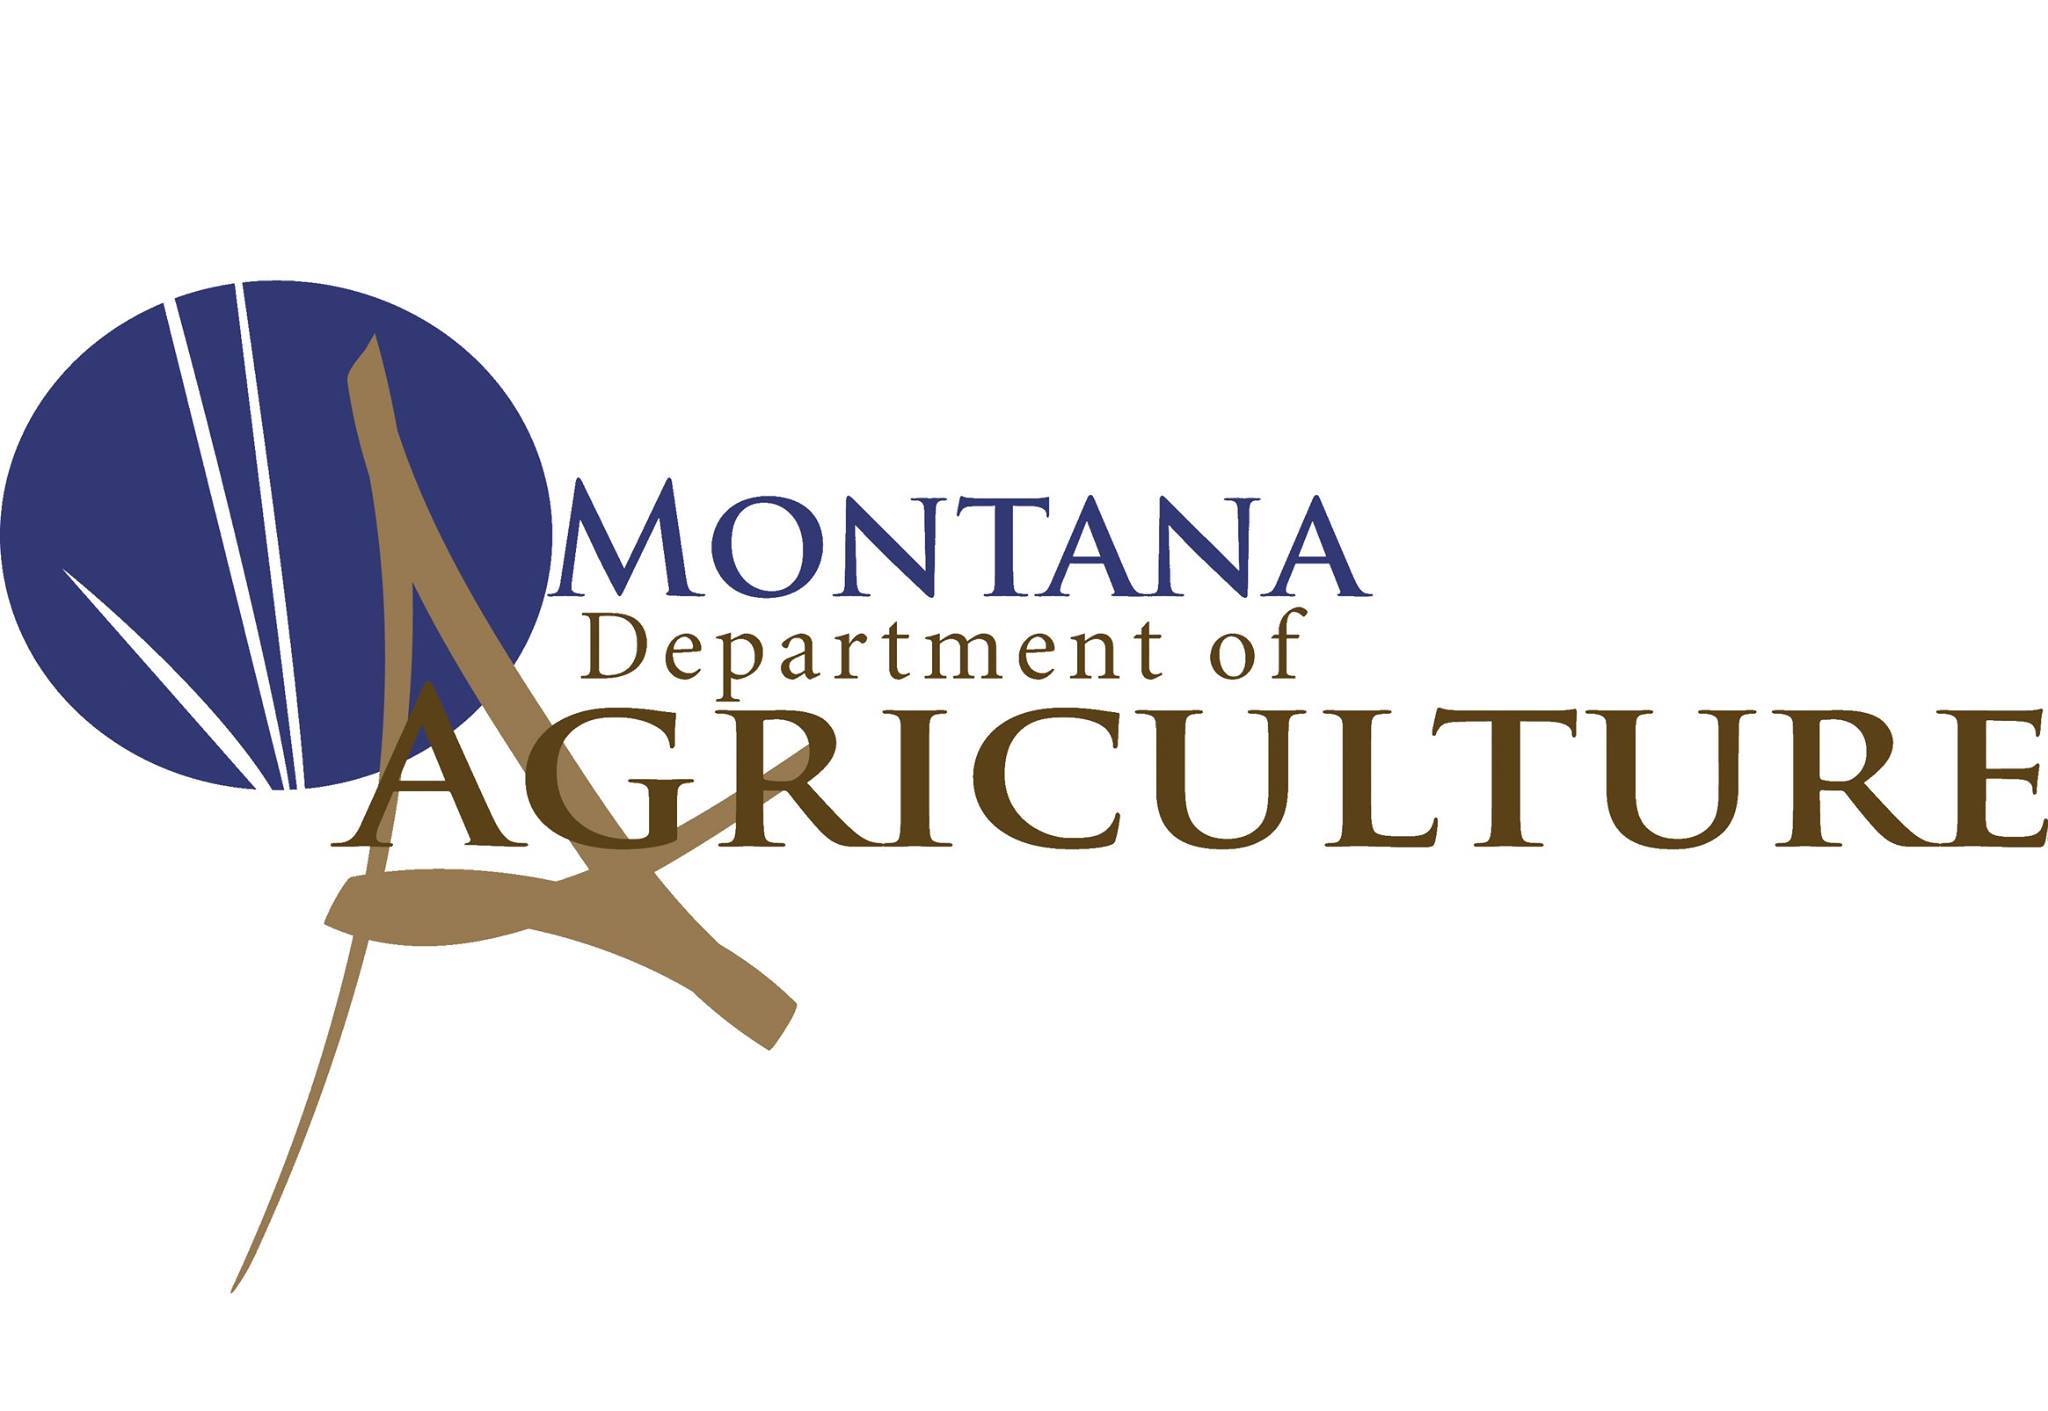 Agreement signed to provide stock agriculture photos to Dept. of Agriculture